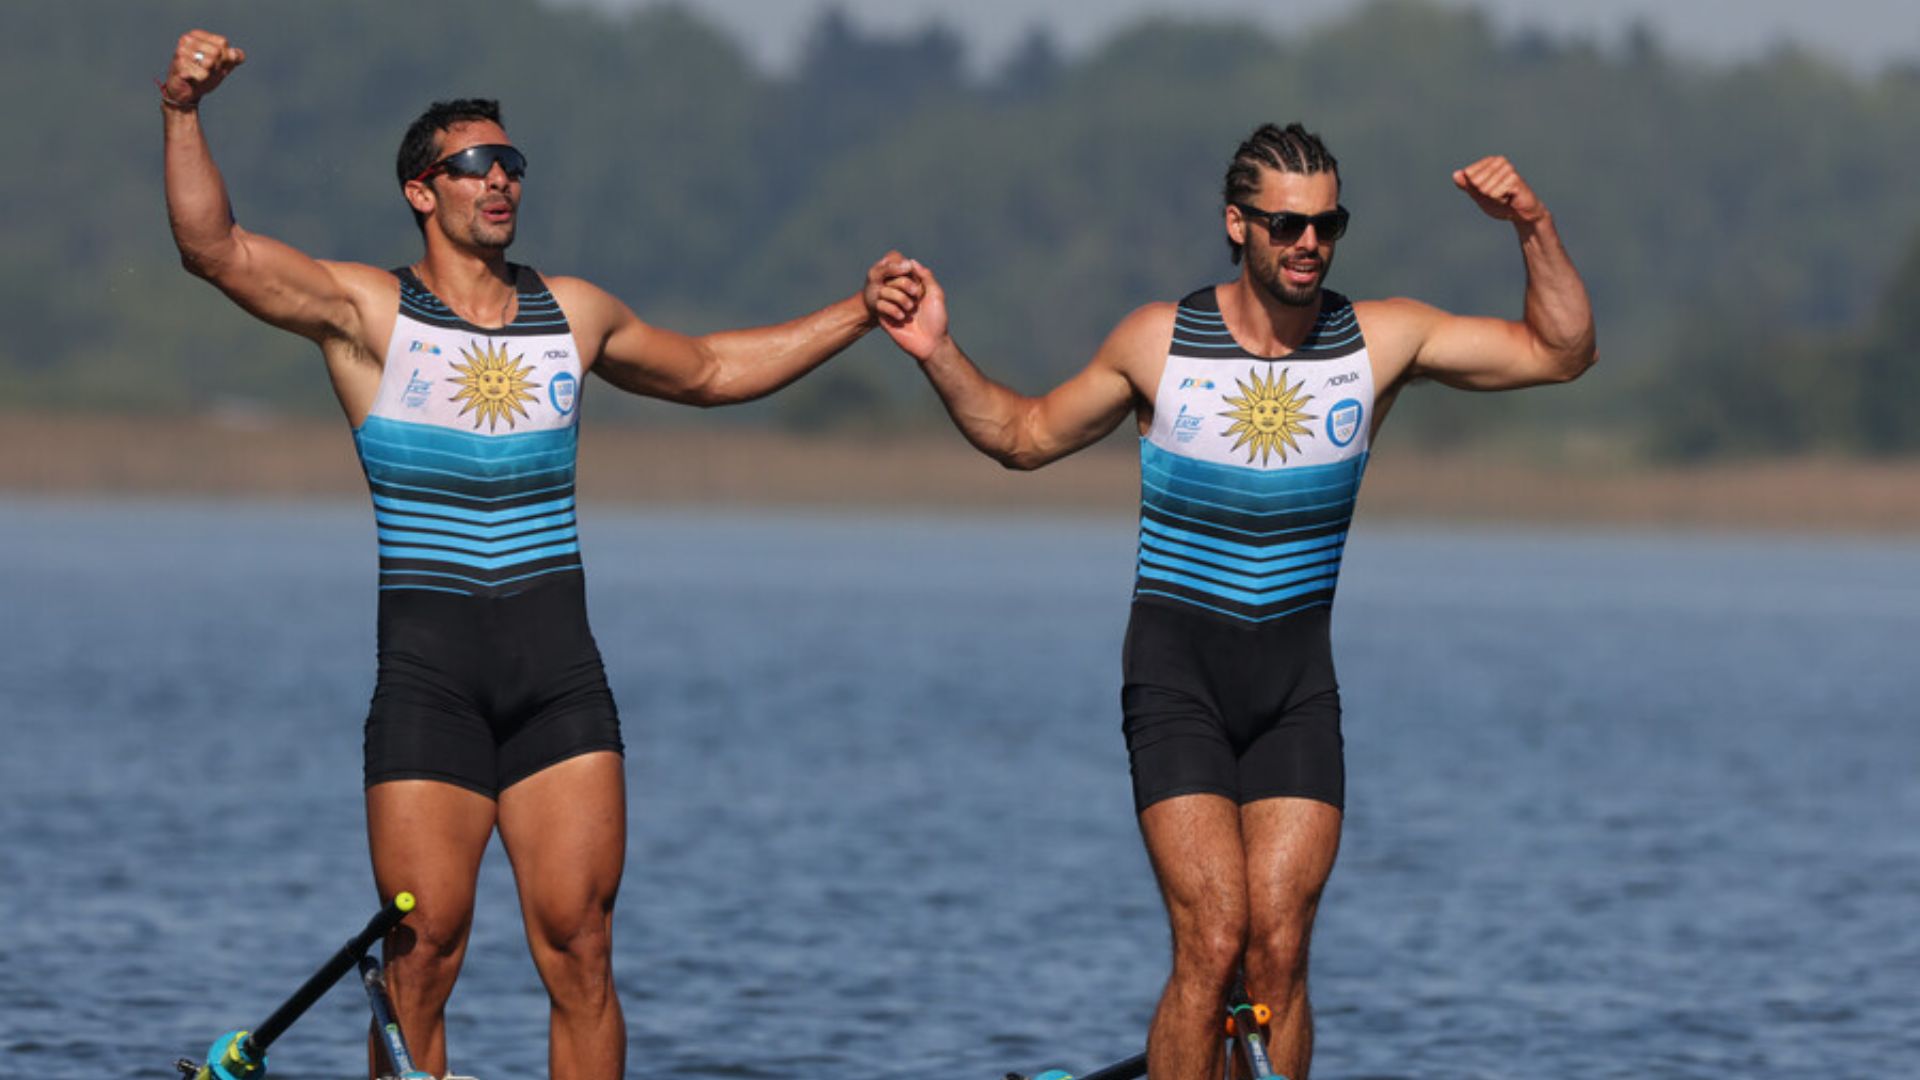 Uruguay strikes again in rowing and wins gold in the male's double sculls